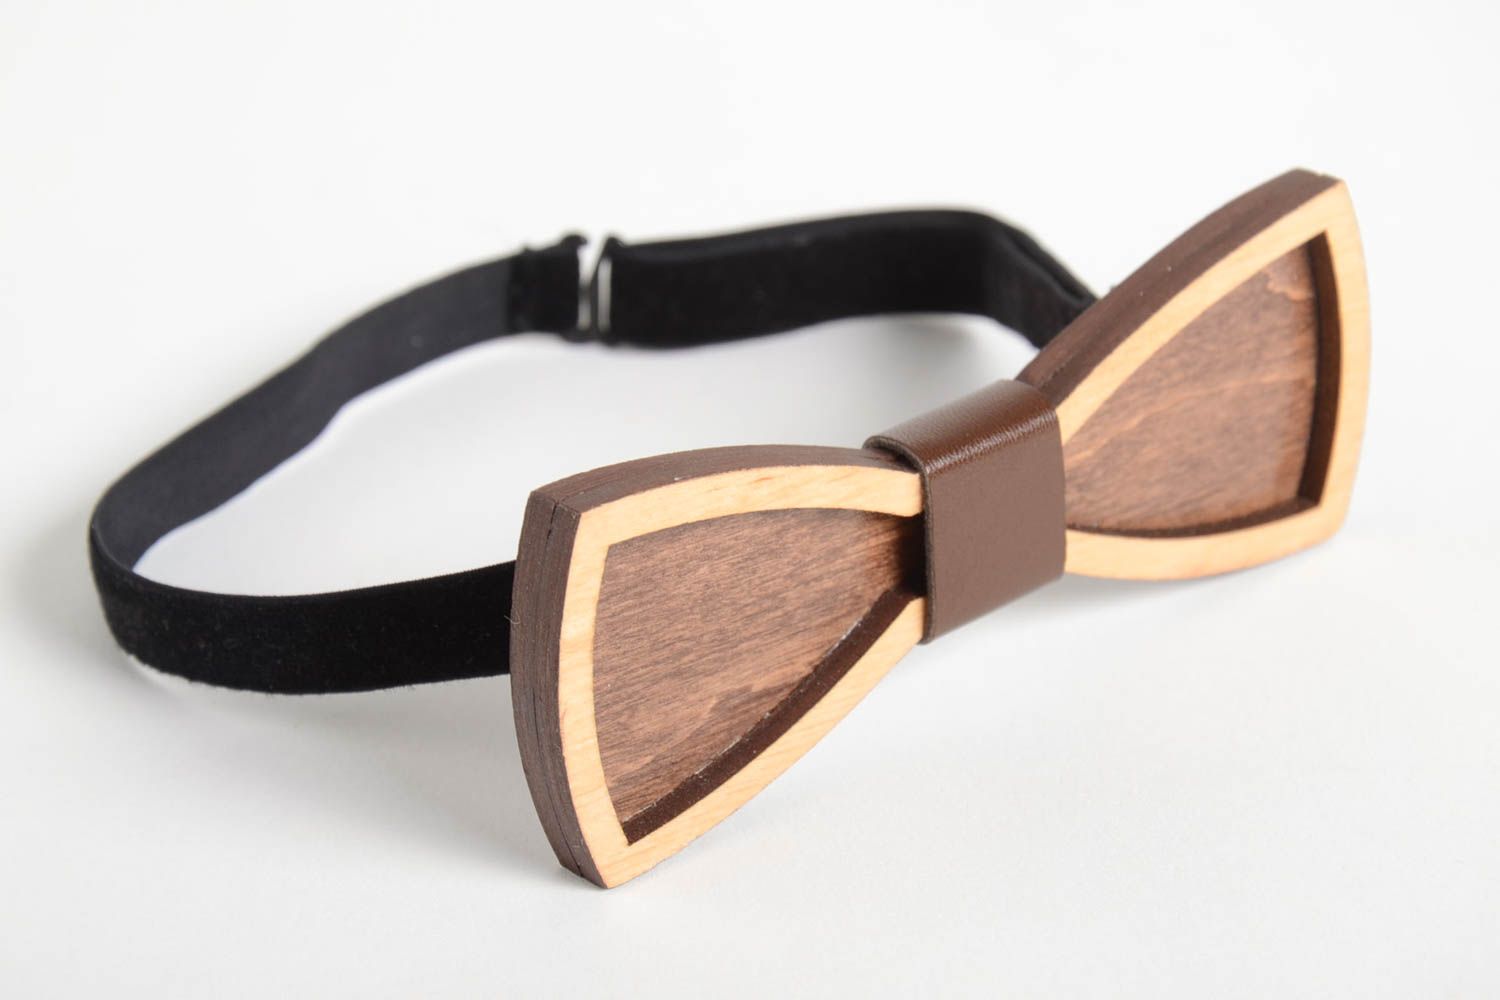 Homemade jewelry wooden bow tie designer accessories fashionable tie cool gifts photo 2